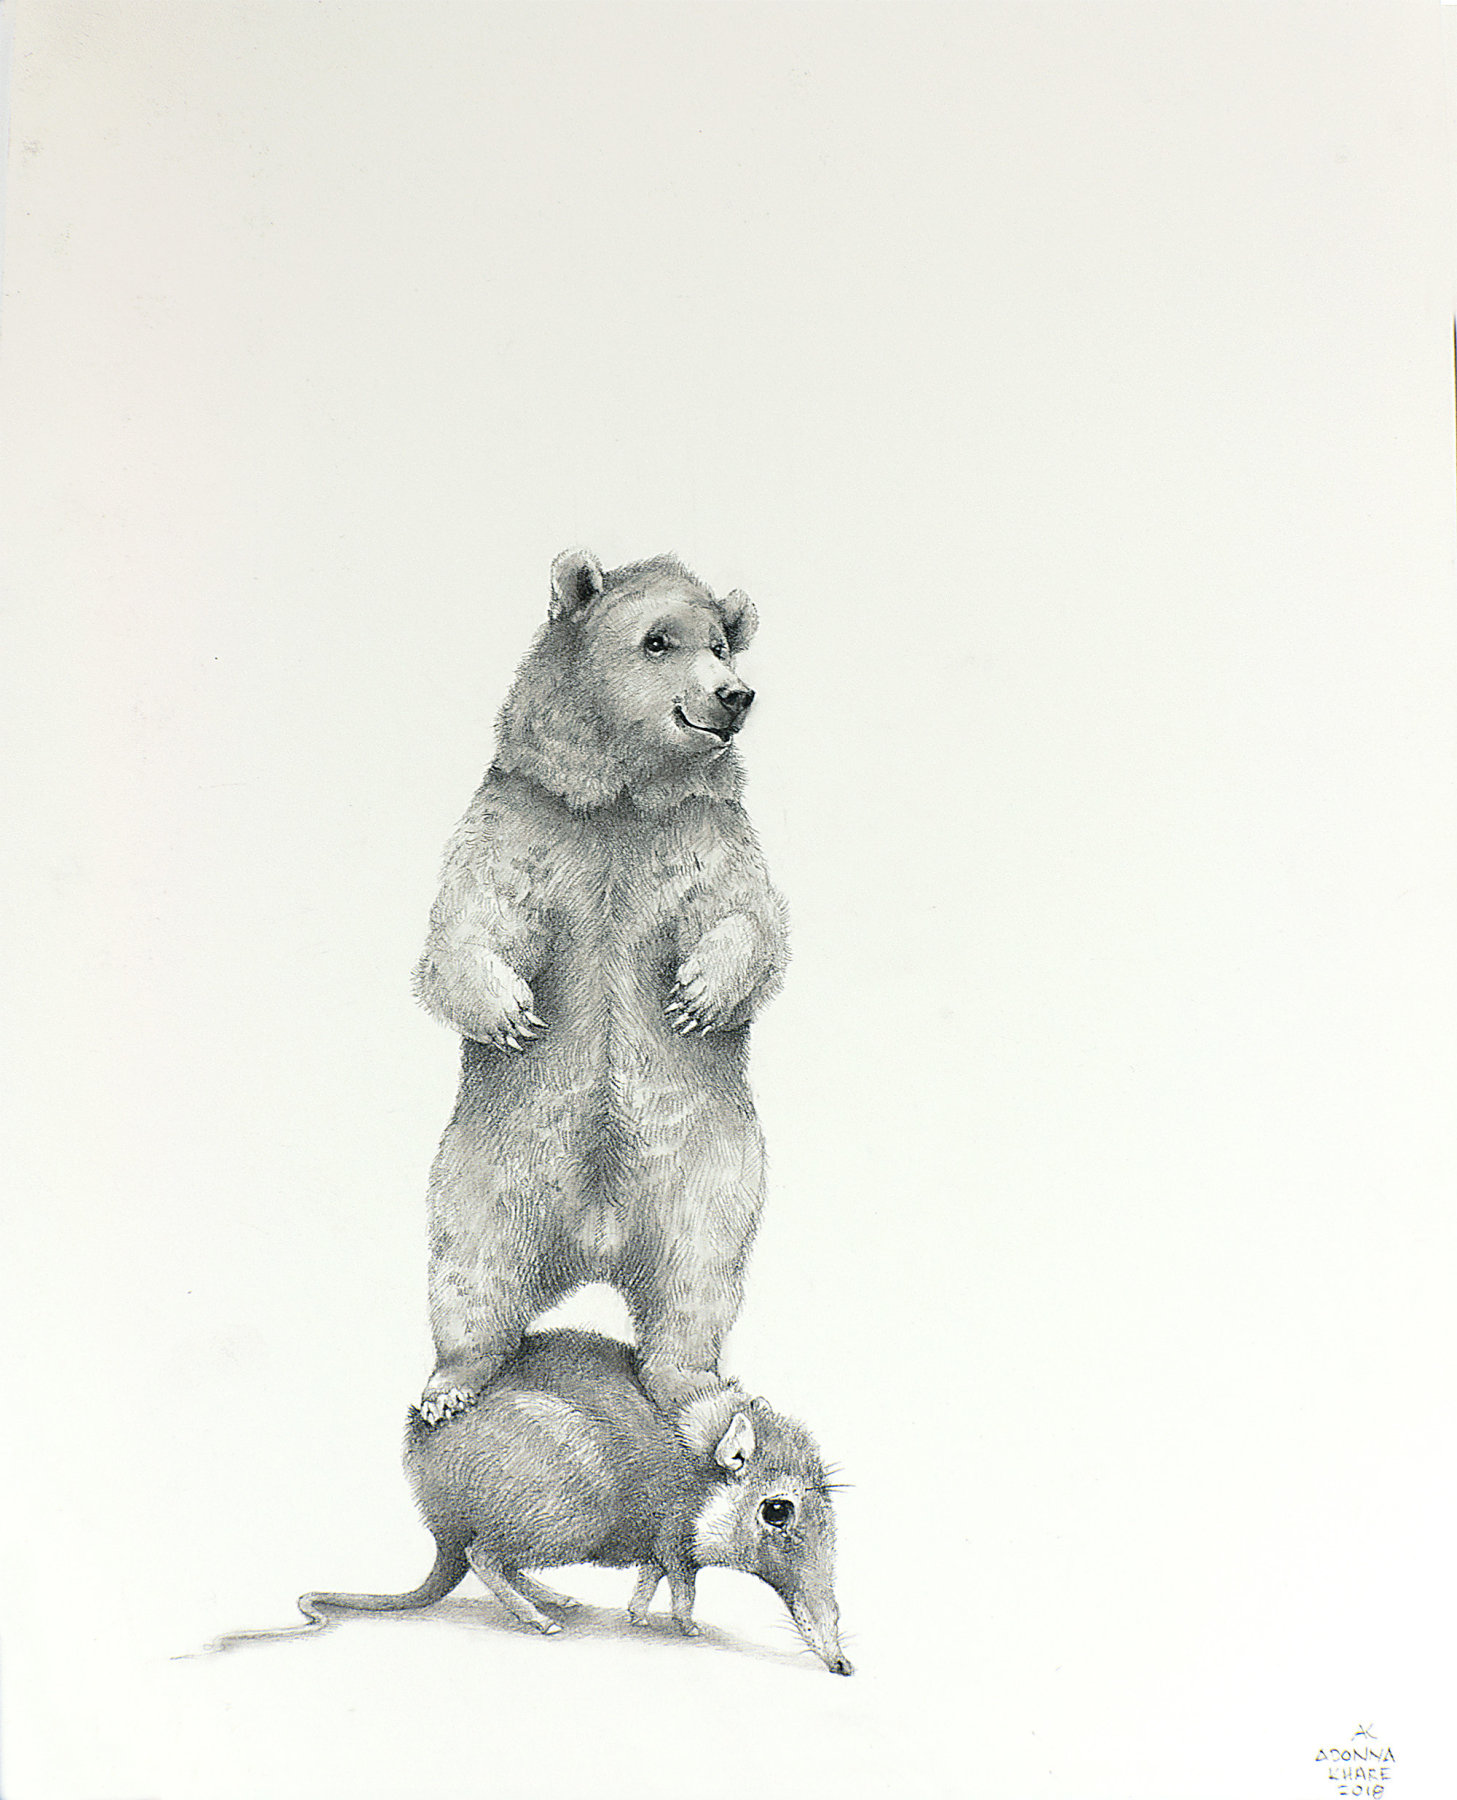 Adonna Khare, Grizzly Rider, 2018